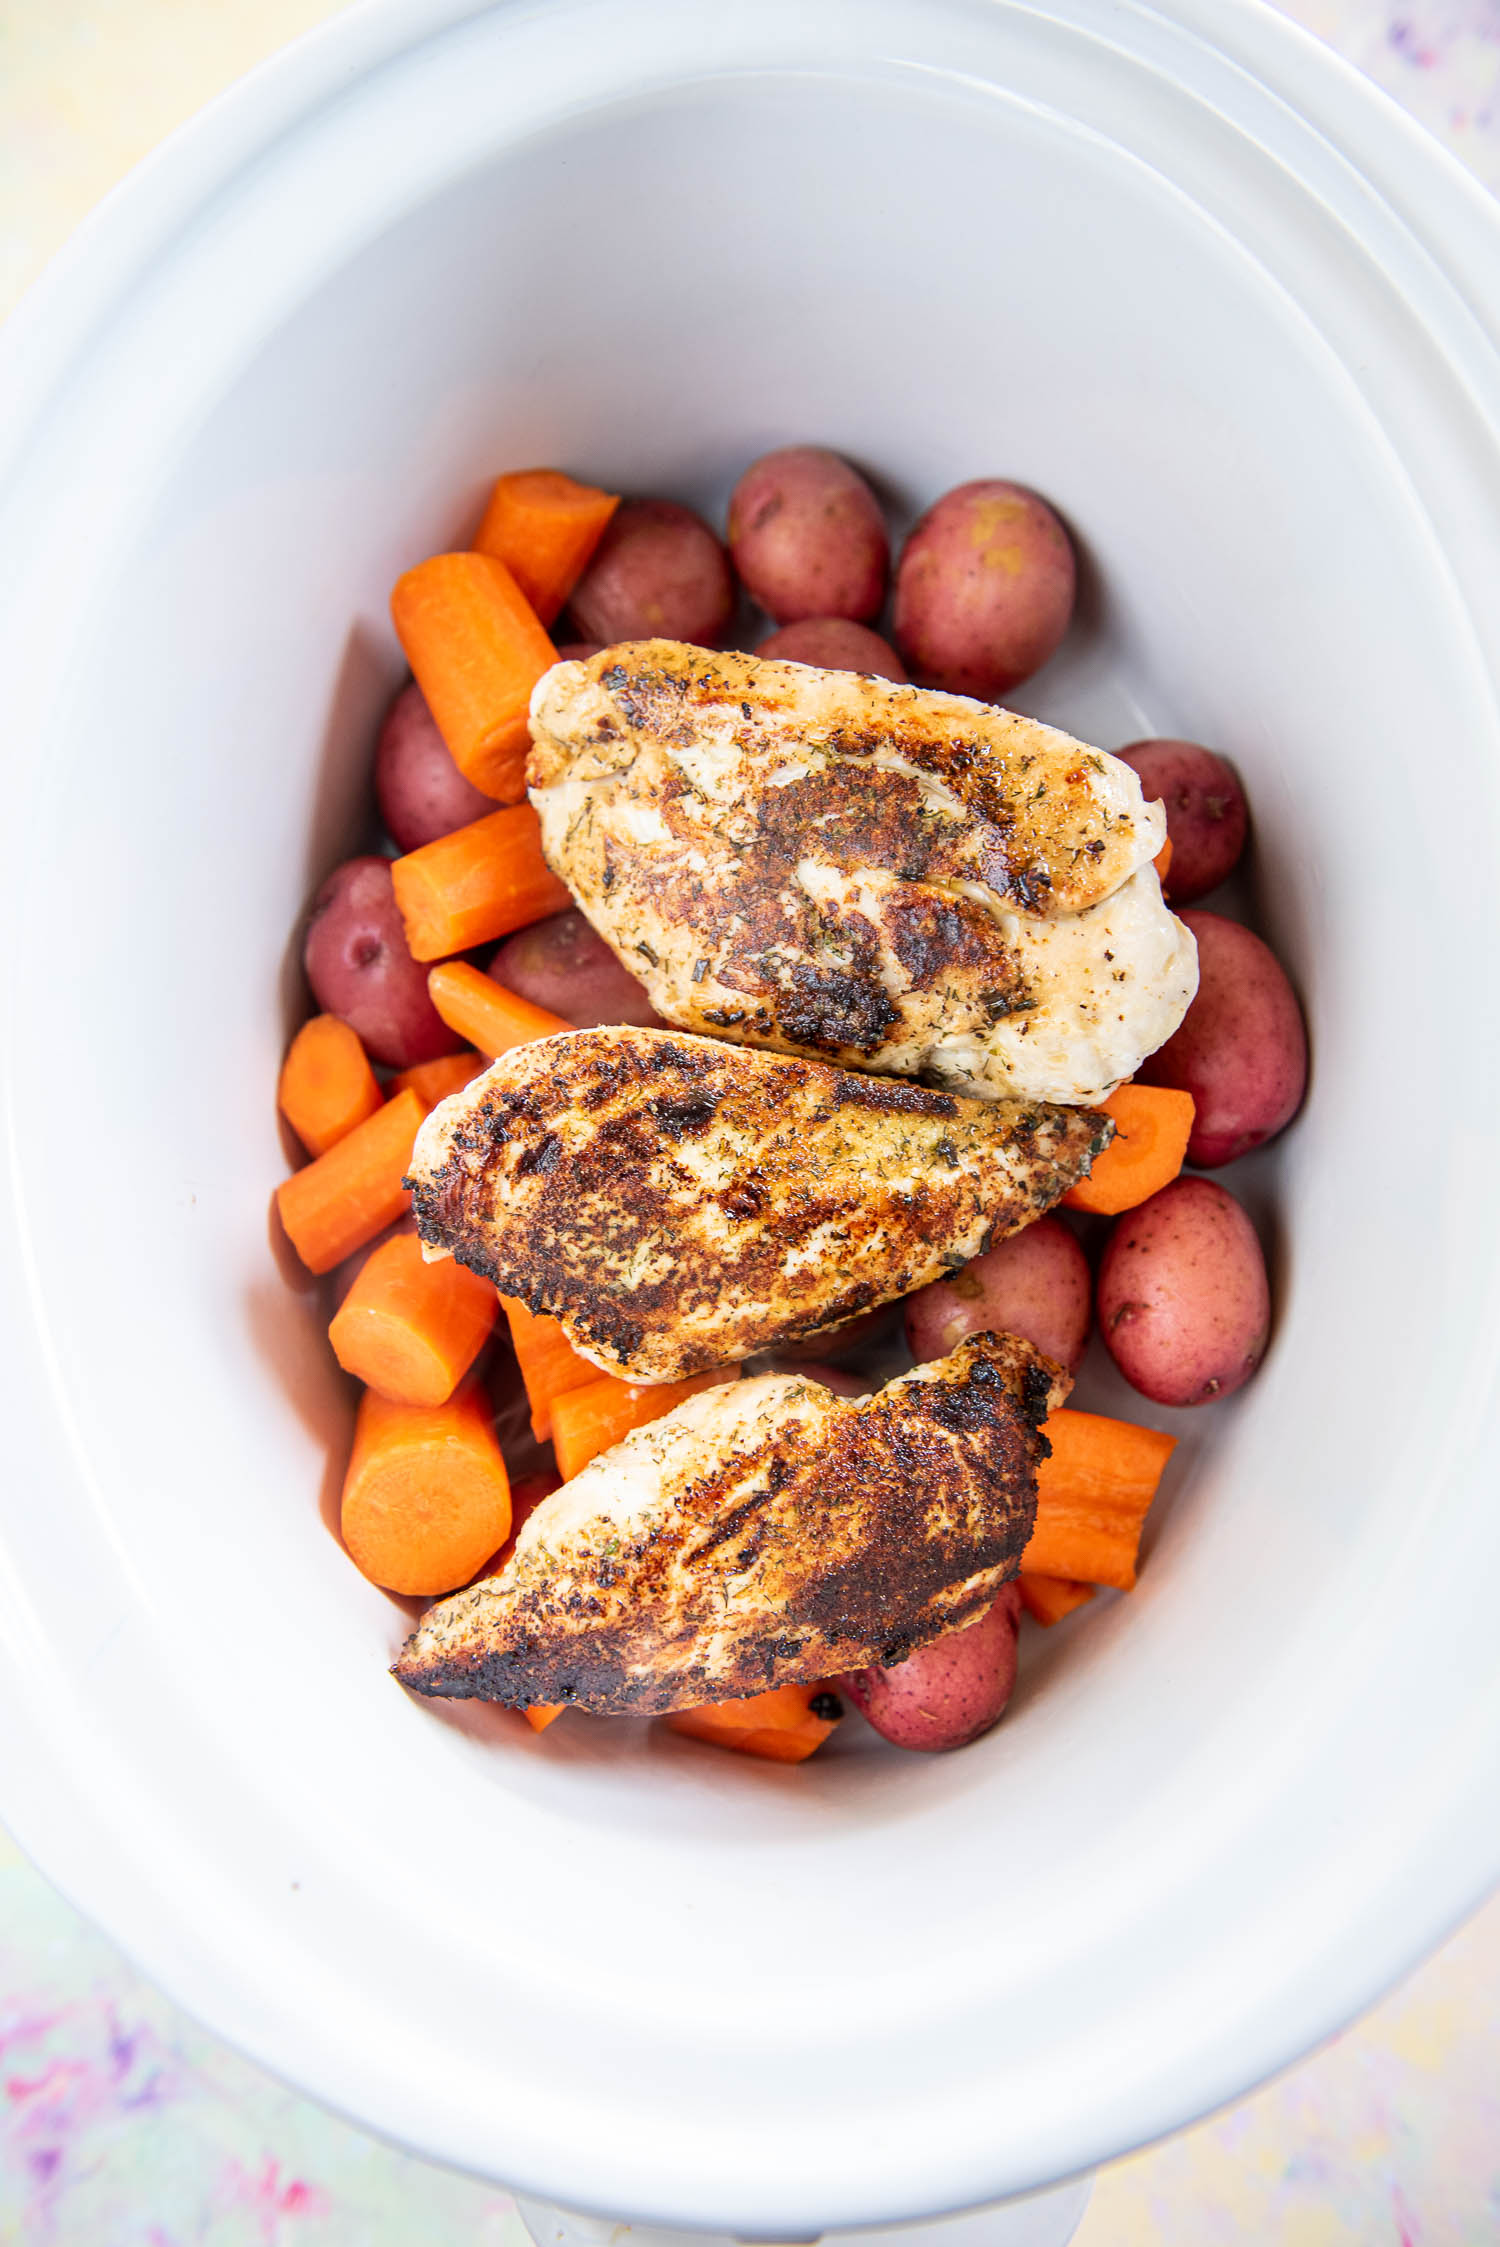 carrots, potatoes and chicken in slow cooker